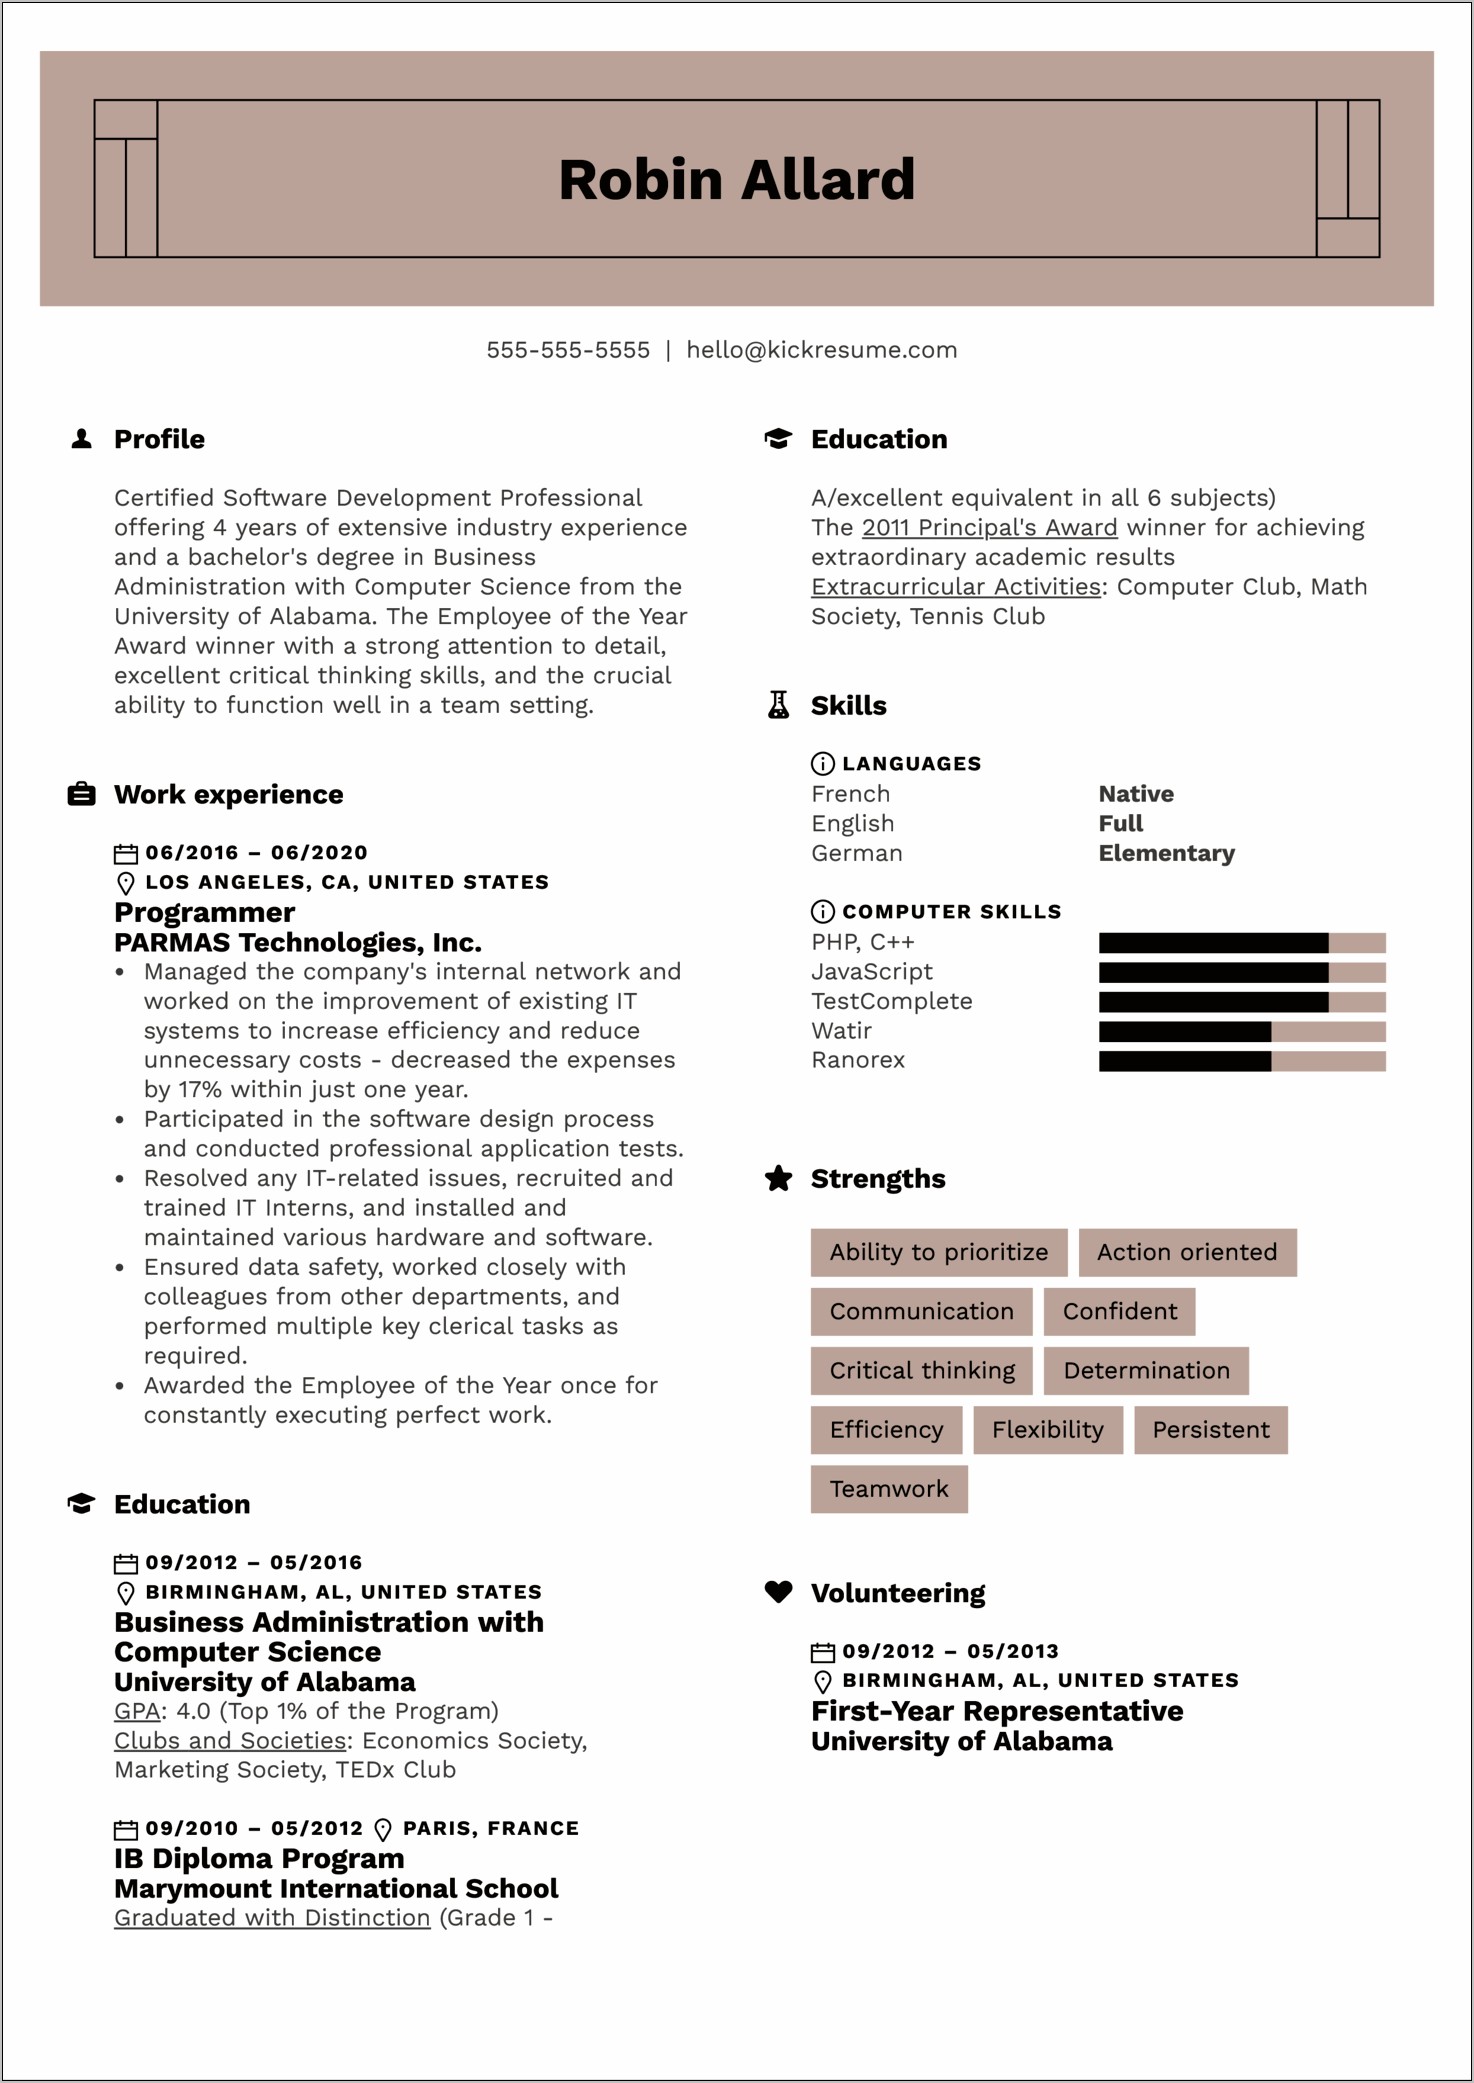 Text Version Of Resume Sample